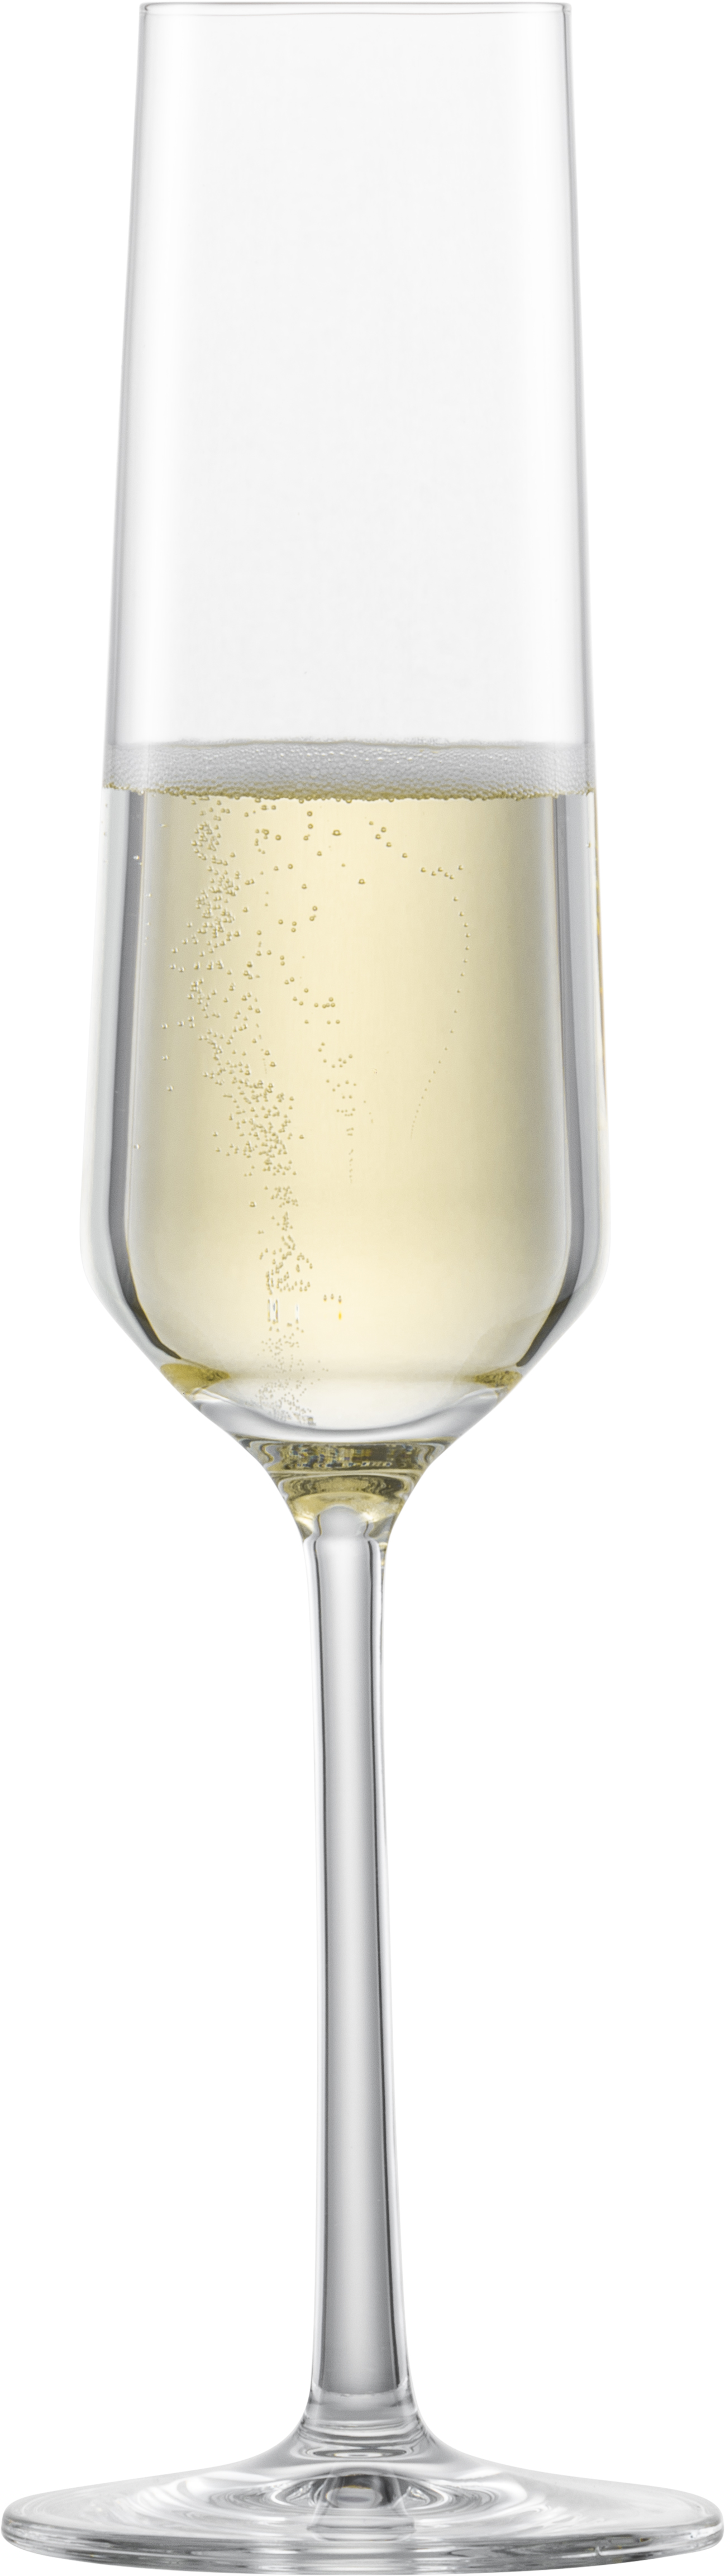 Champagne glass Pure | ZWIESEL GLAS